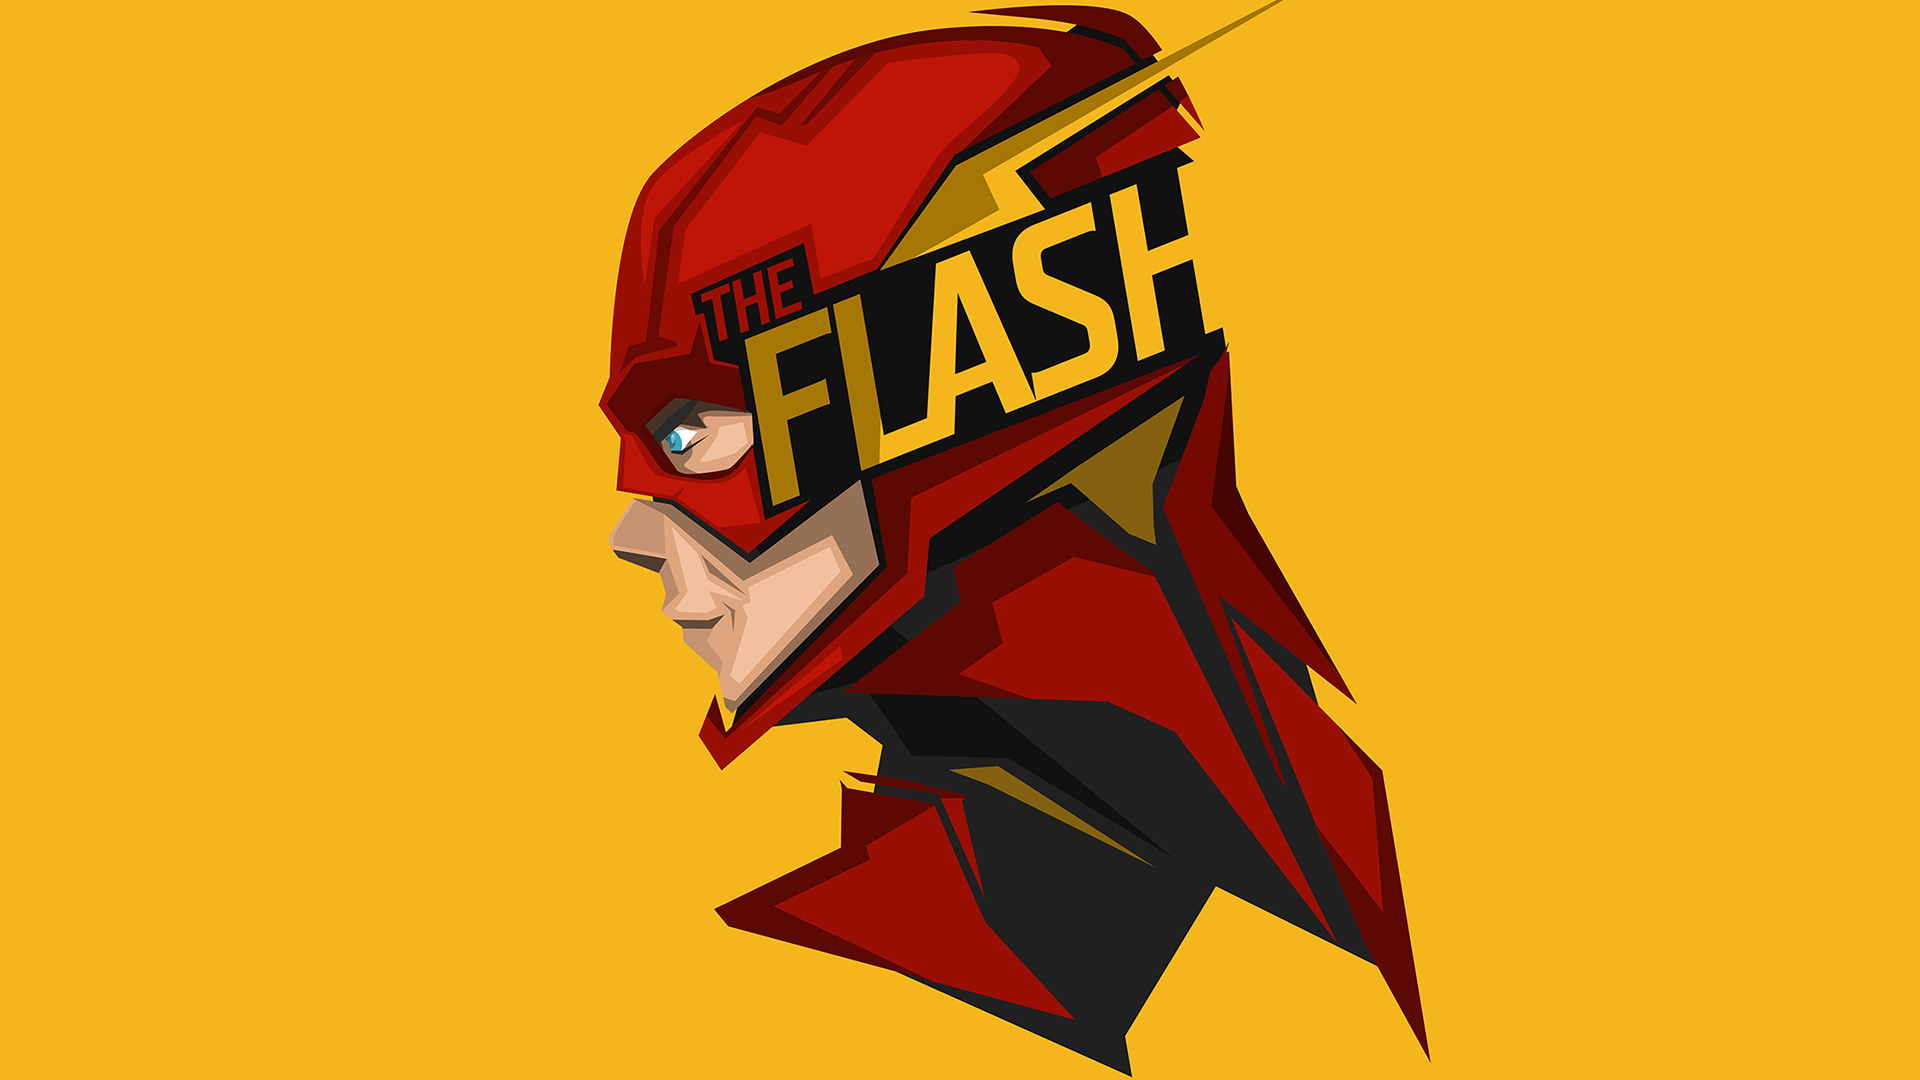 The Flash Abstract Art, HD Superheroes, 4k Wallpapers, Images ...